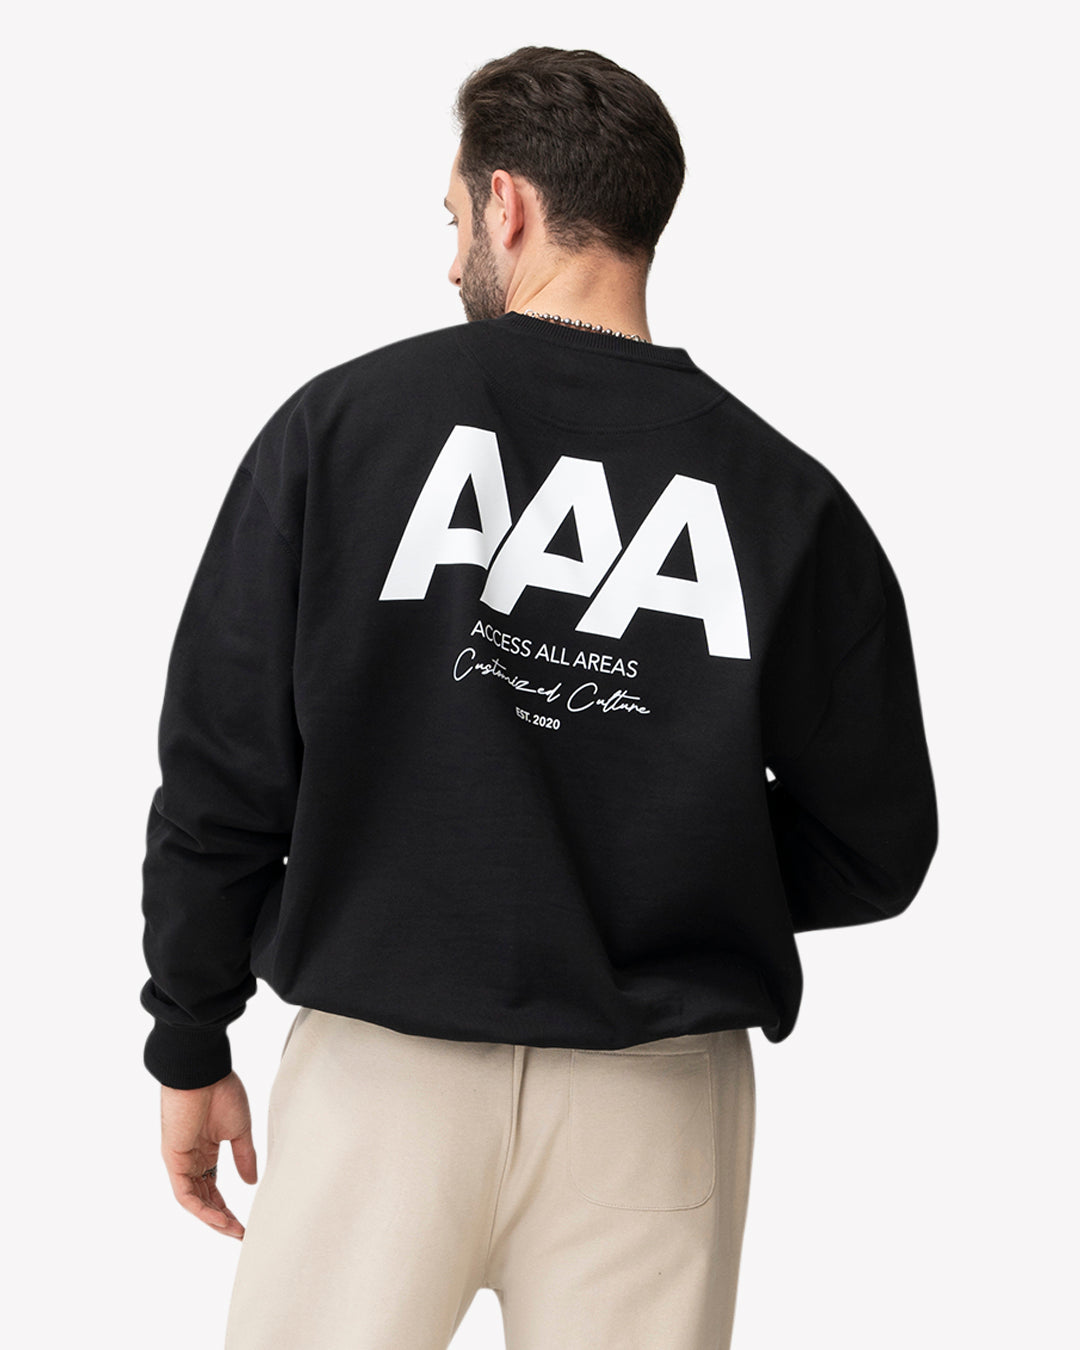 Access All Areas Sweater Black | Customized Culture